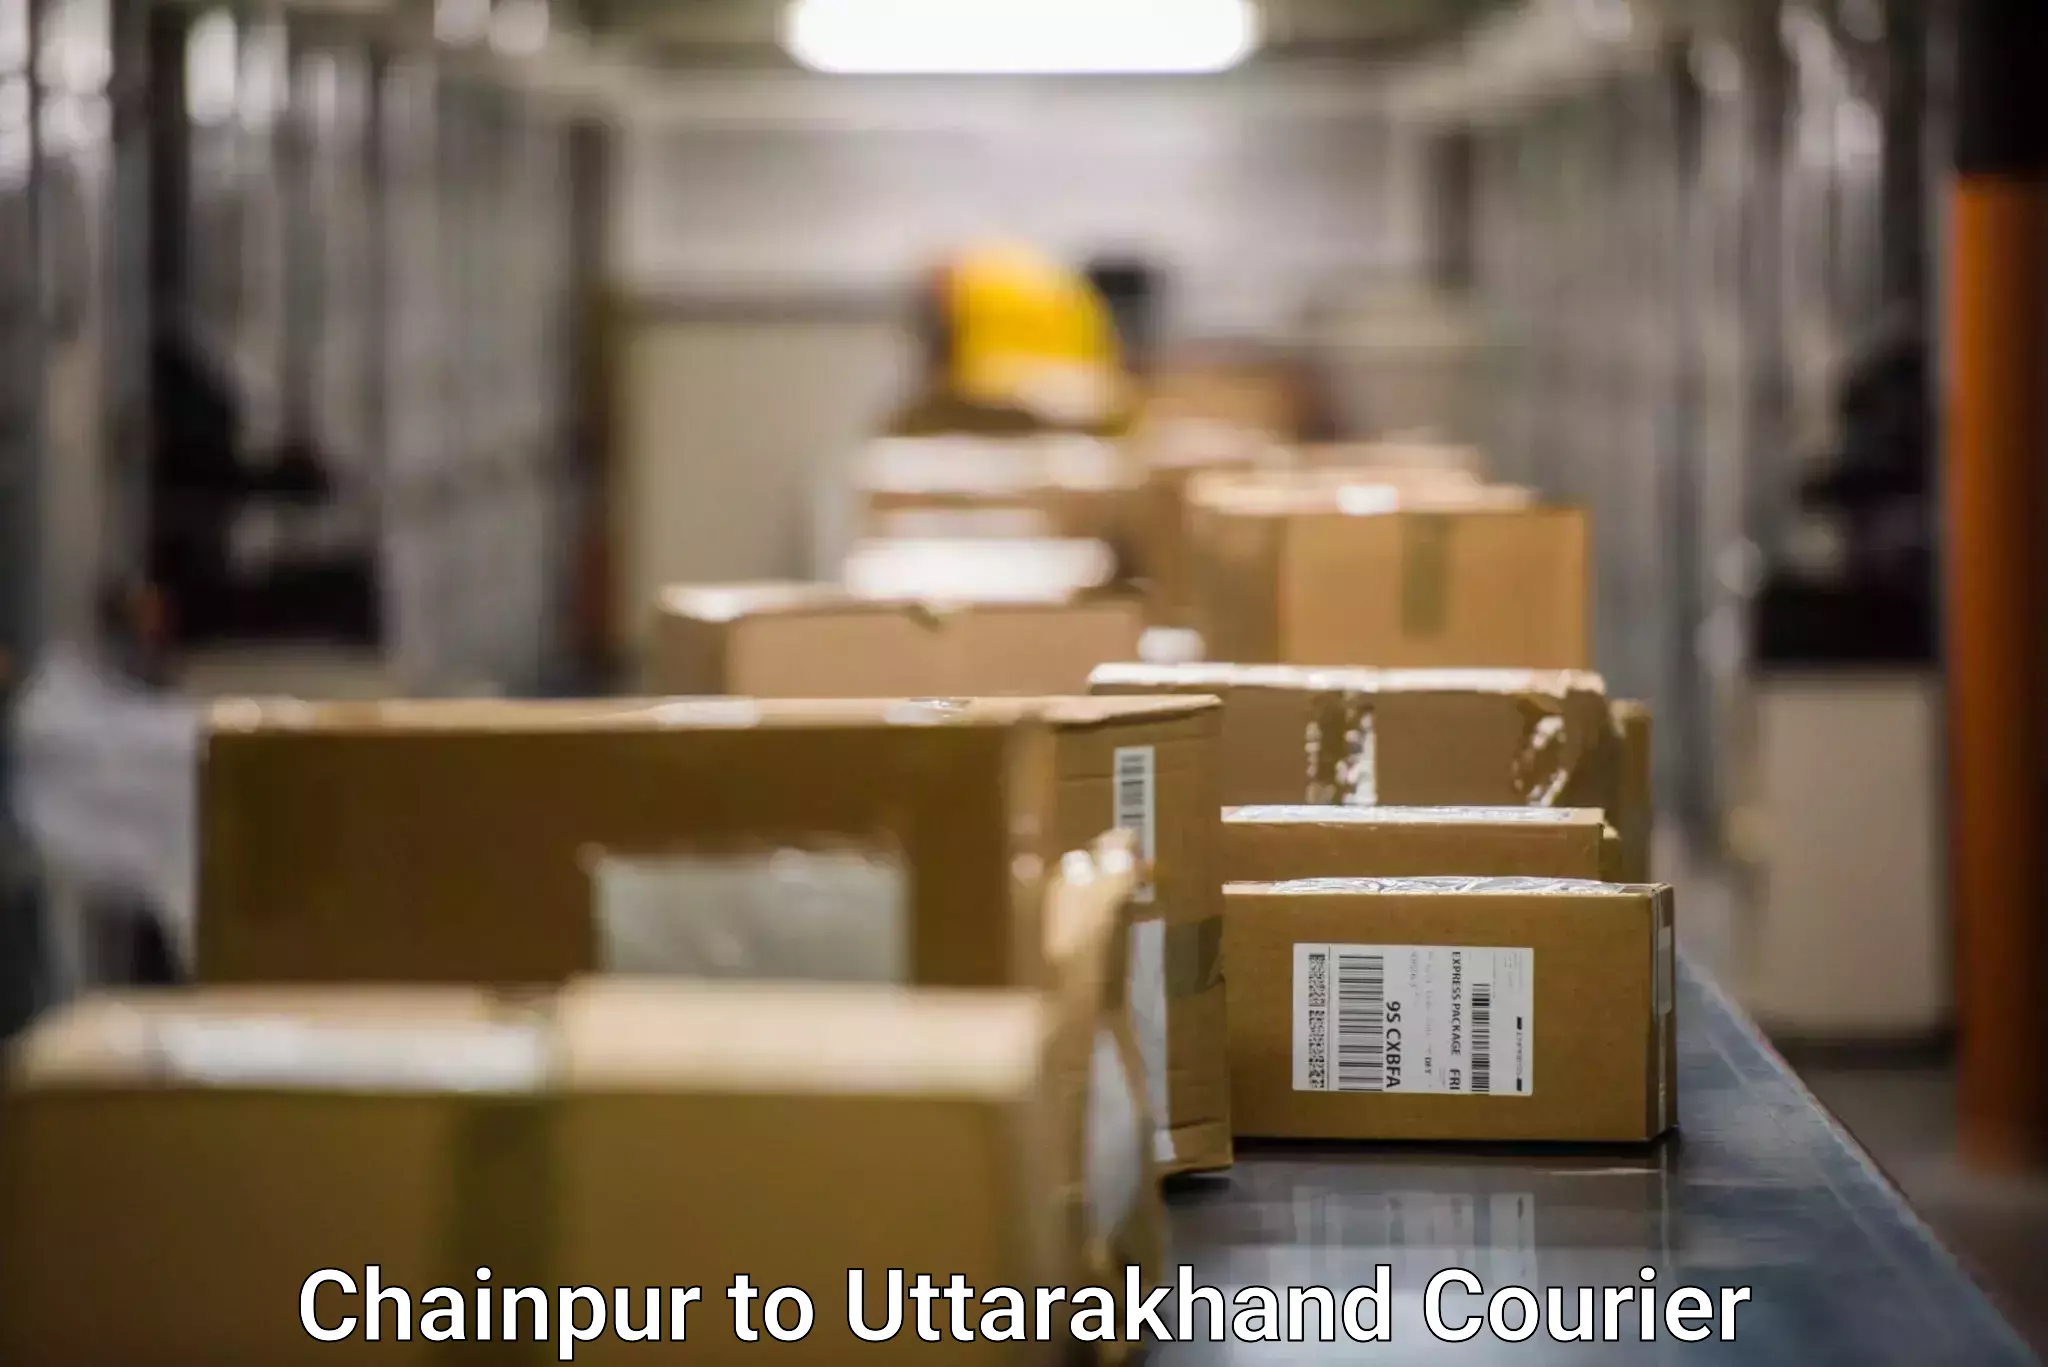 Fragile item shipping Chainpur to Roorkee